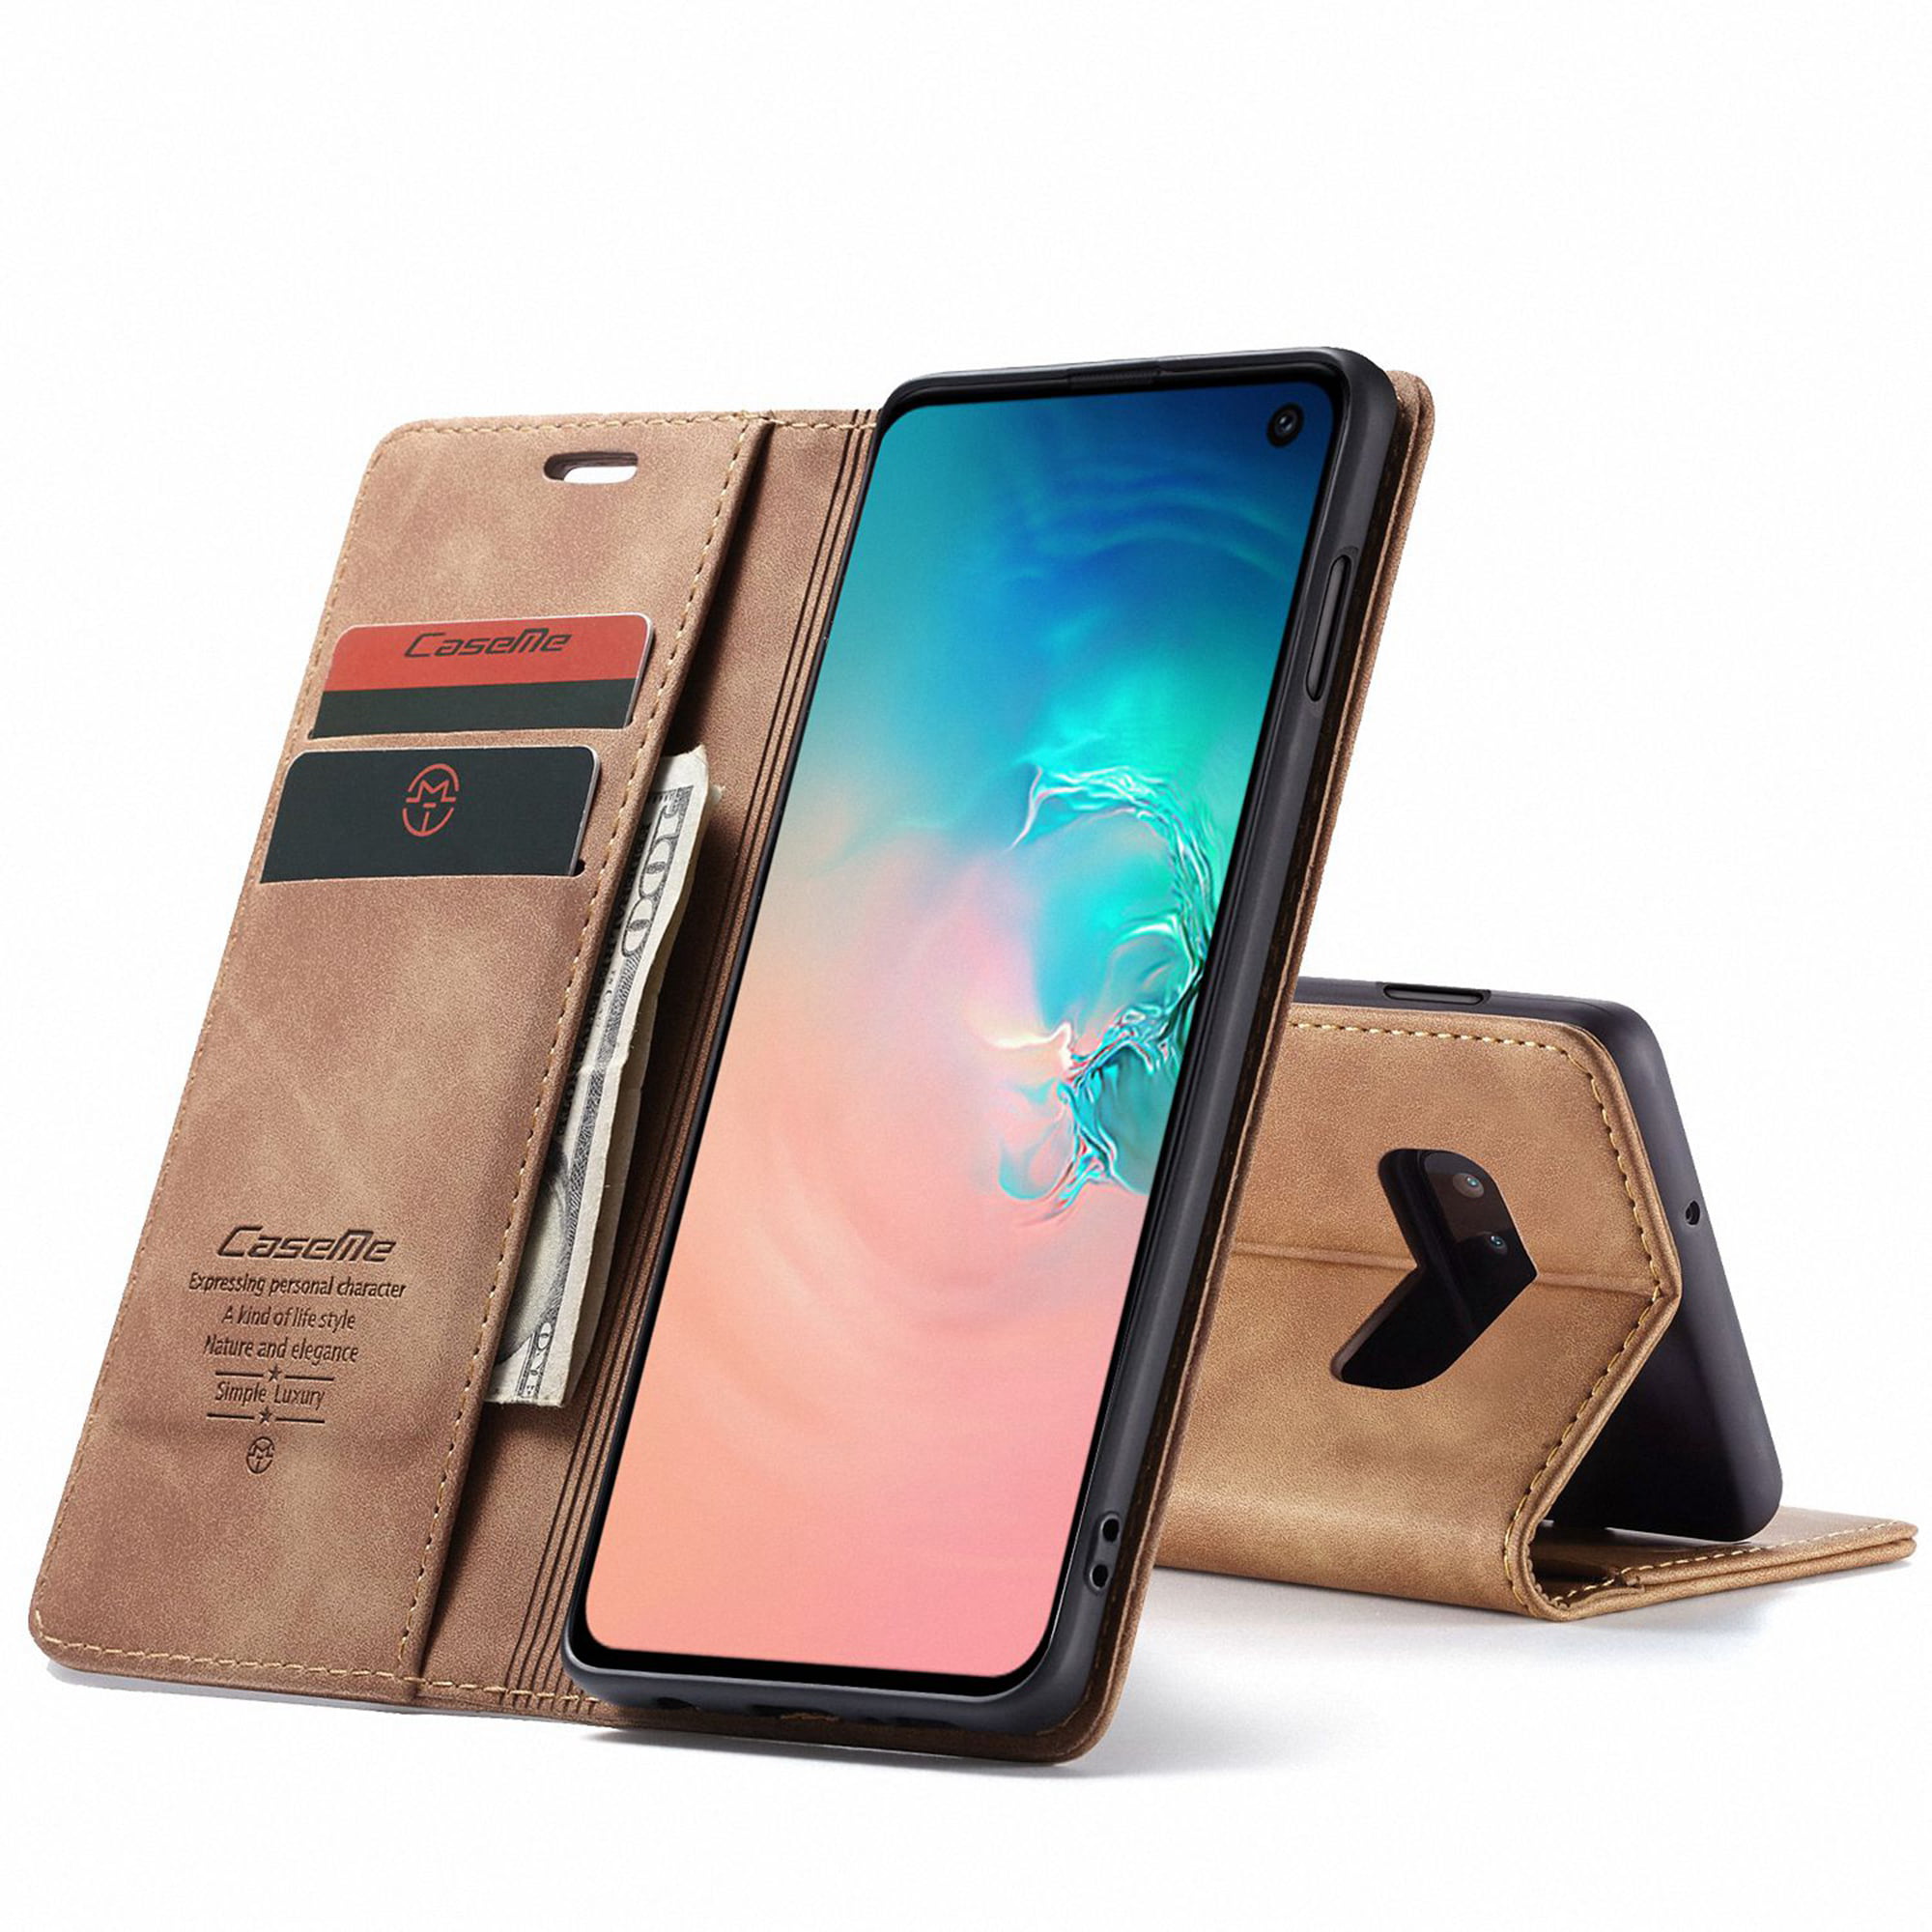 Shockproof Flip Case Cover for Samsung Galaxy S10e Lomogo Leather Wallet Case for Galaxy S10e with Stand Feature Card Holder Magnetic Closure LOYYO080313 Black